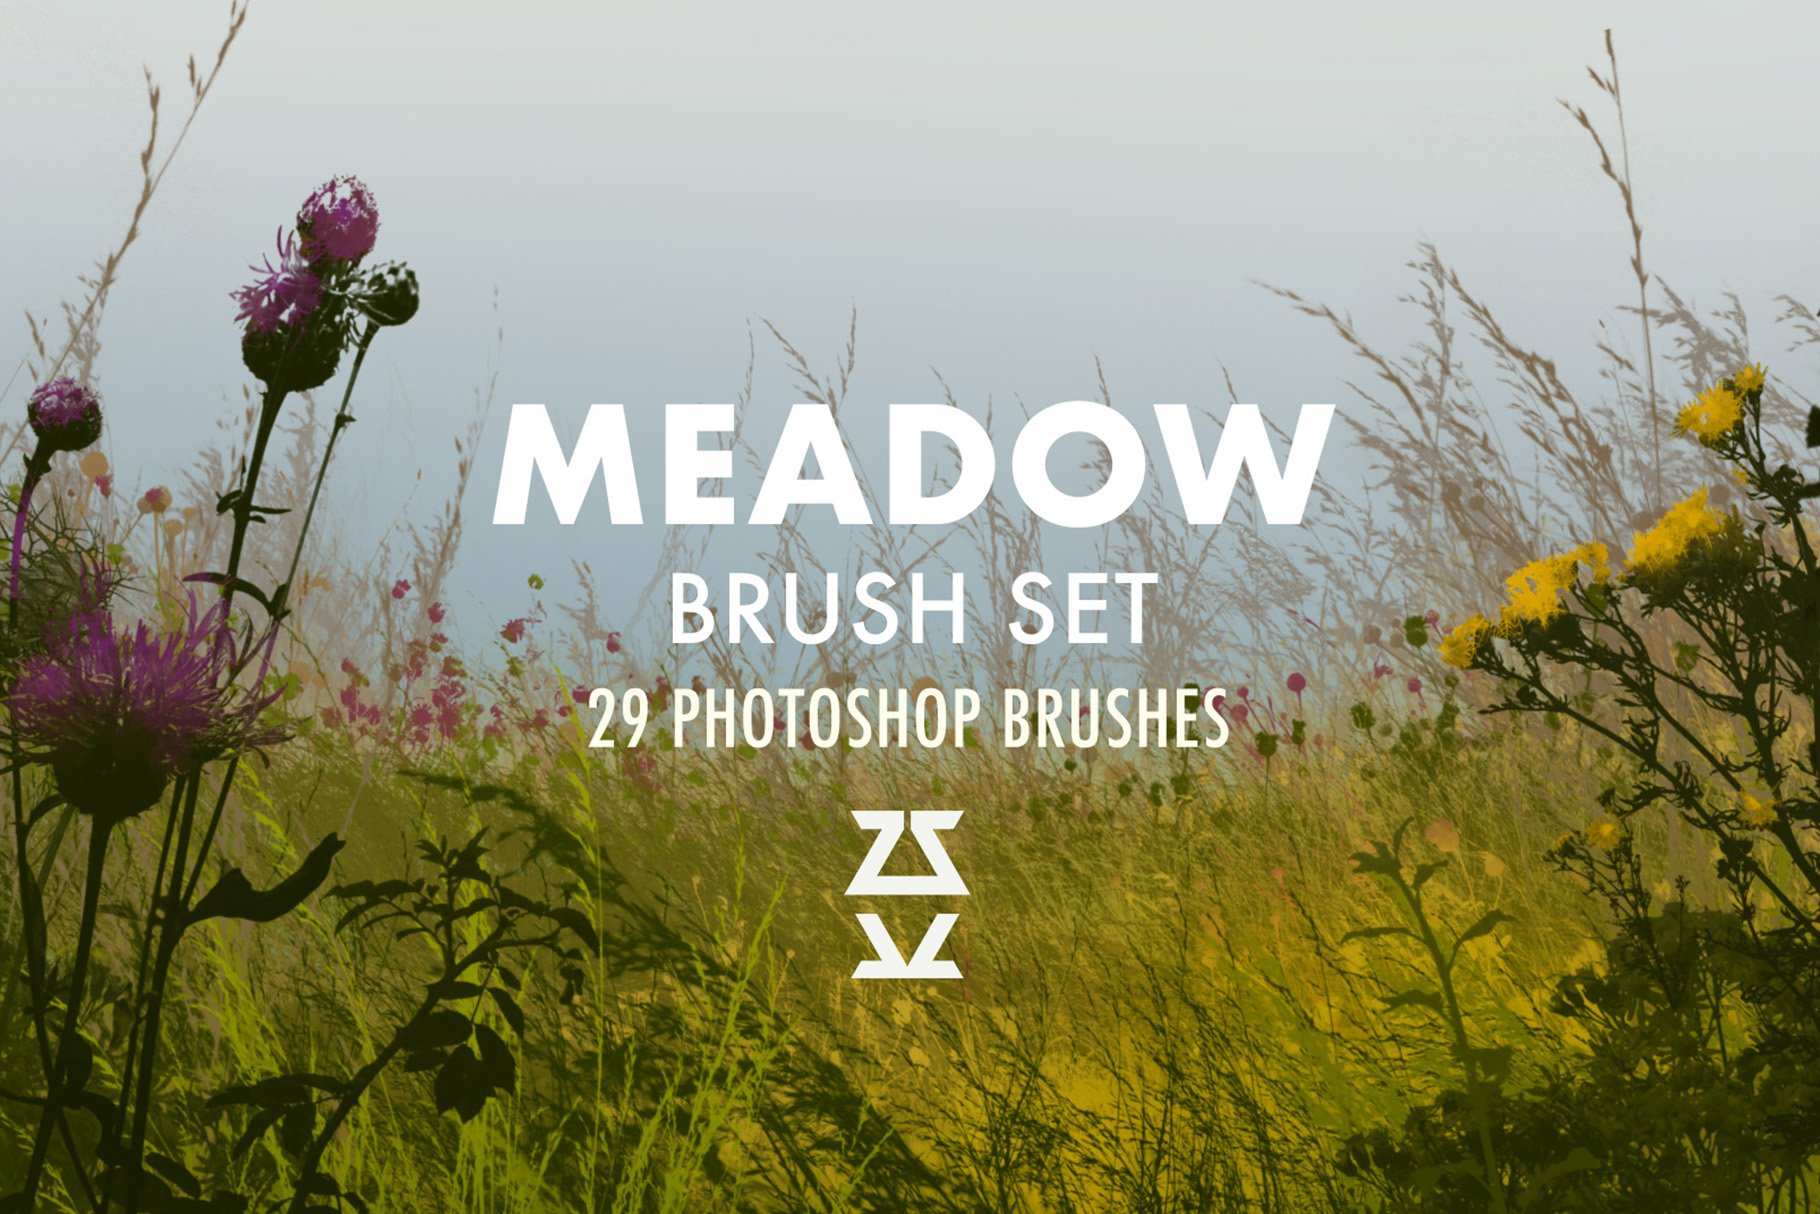 Meadow Brush Setcover image.